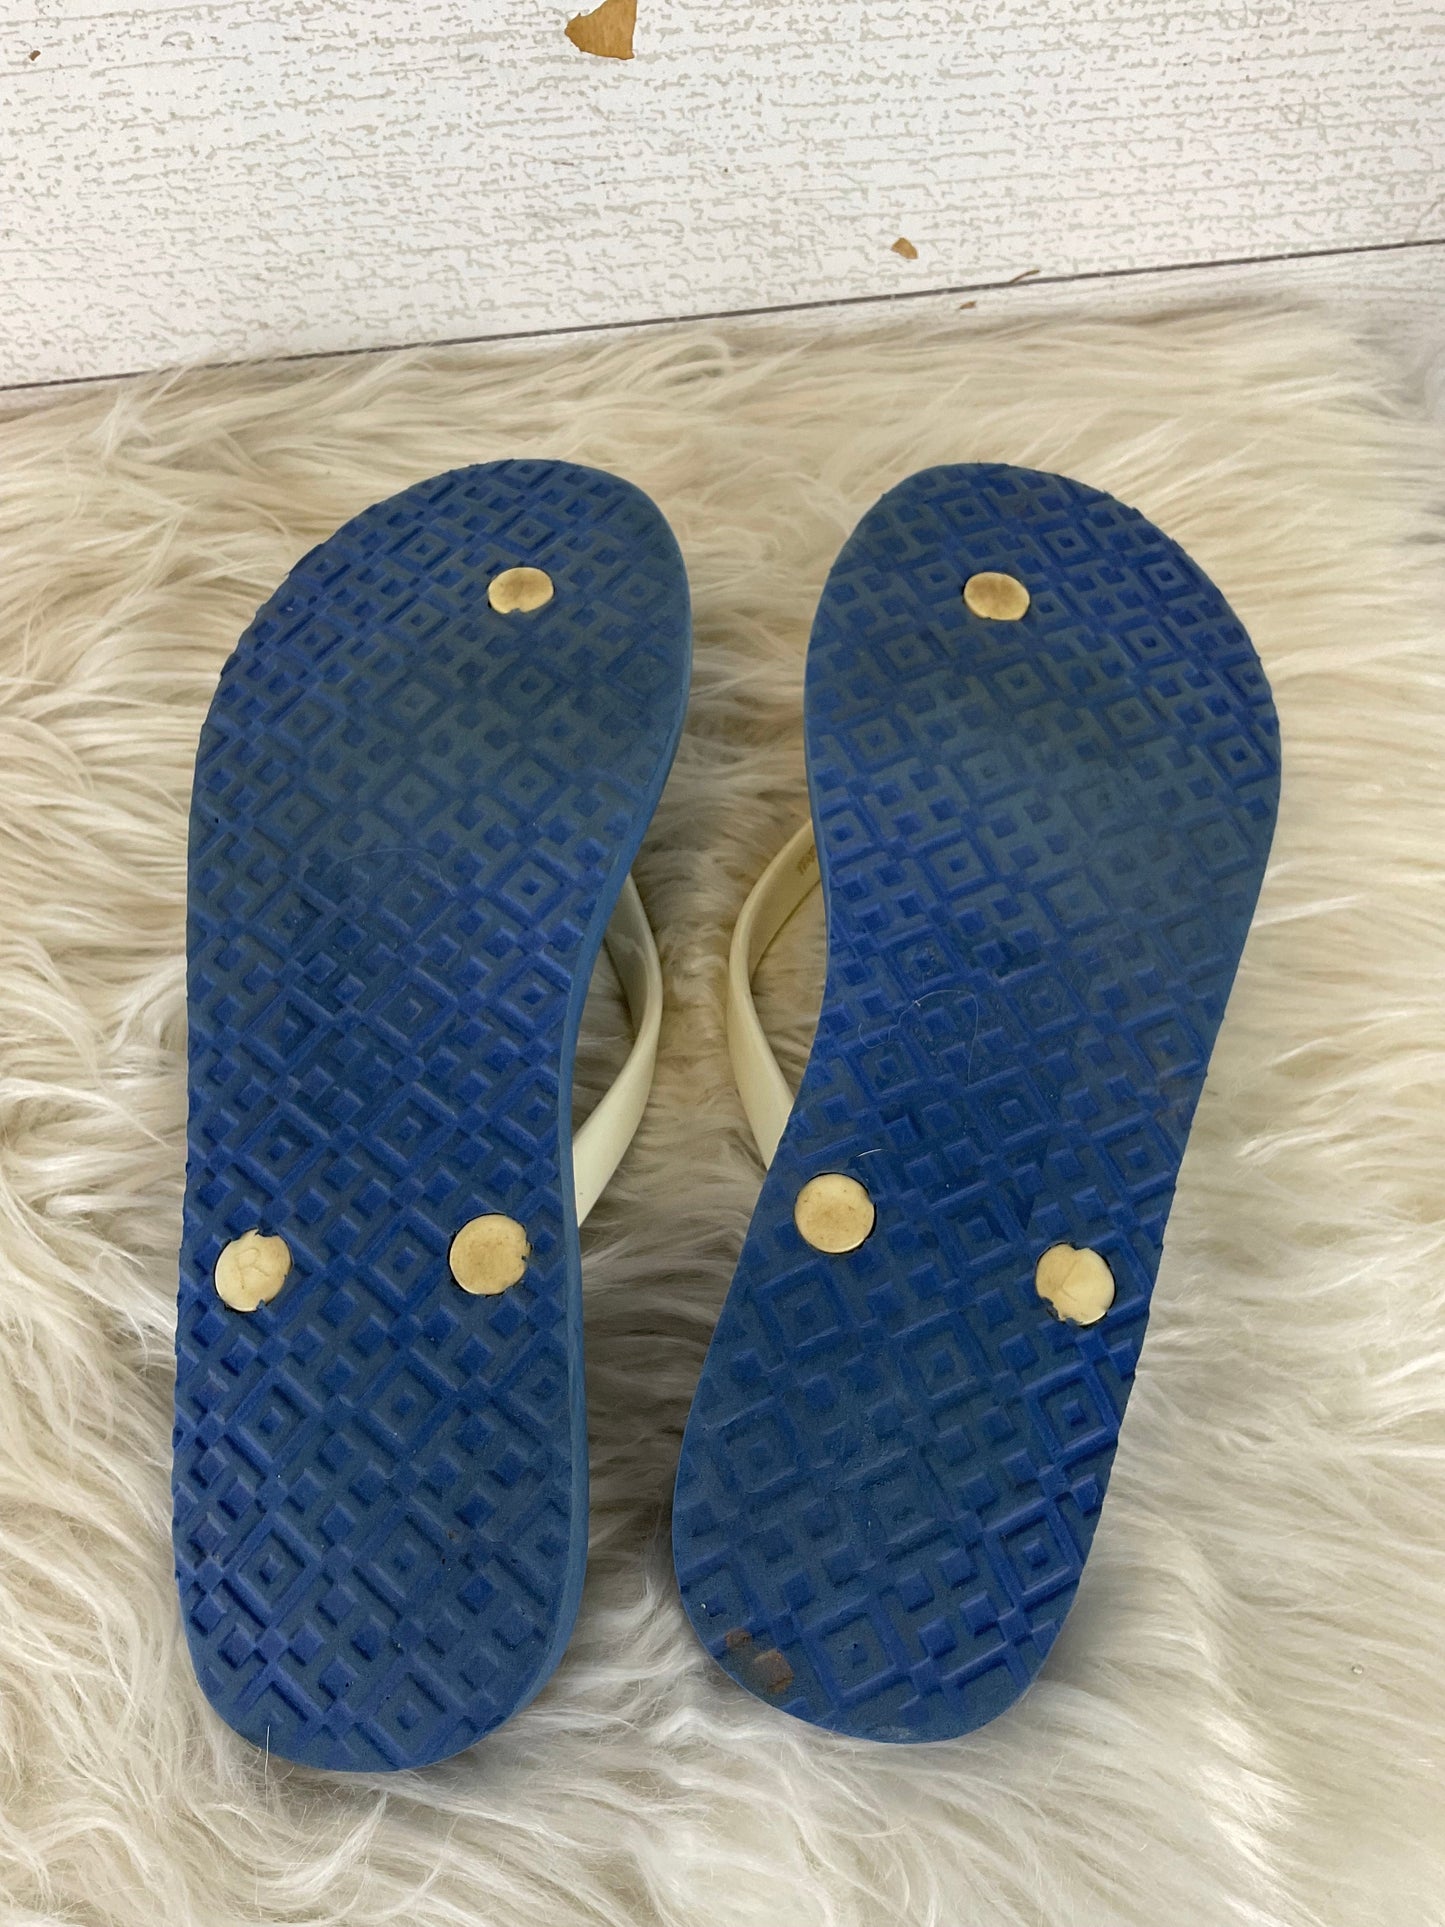 Sandals Designer By Tory Burch  Size: 8